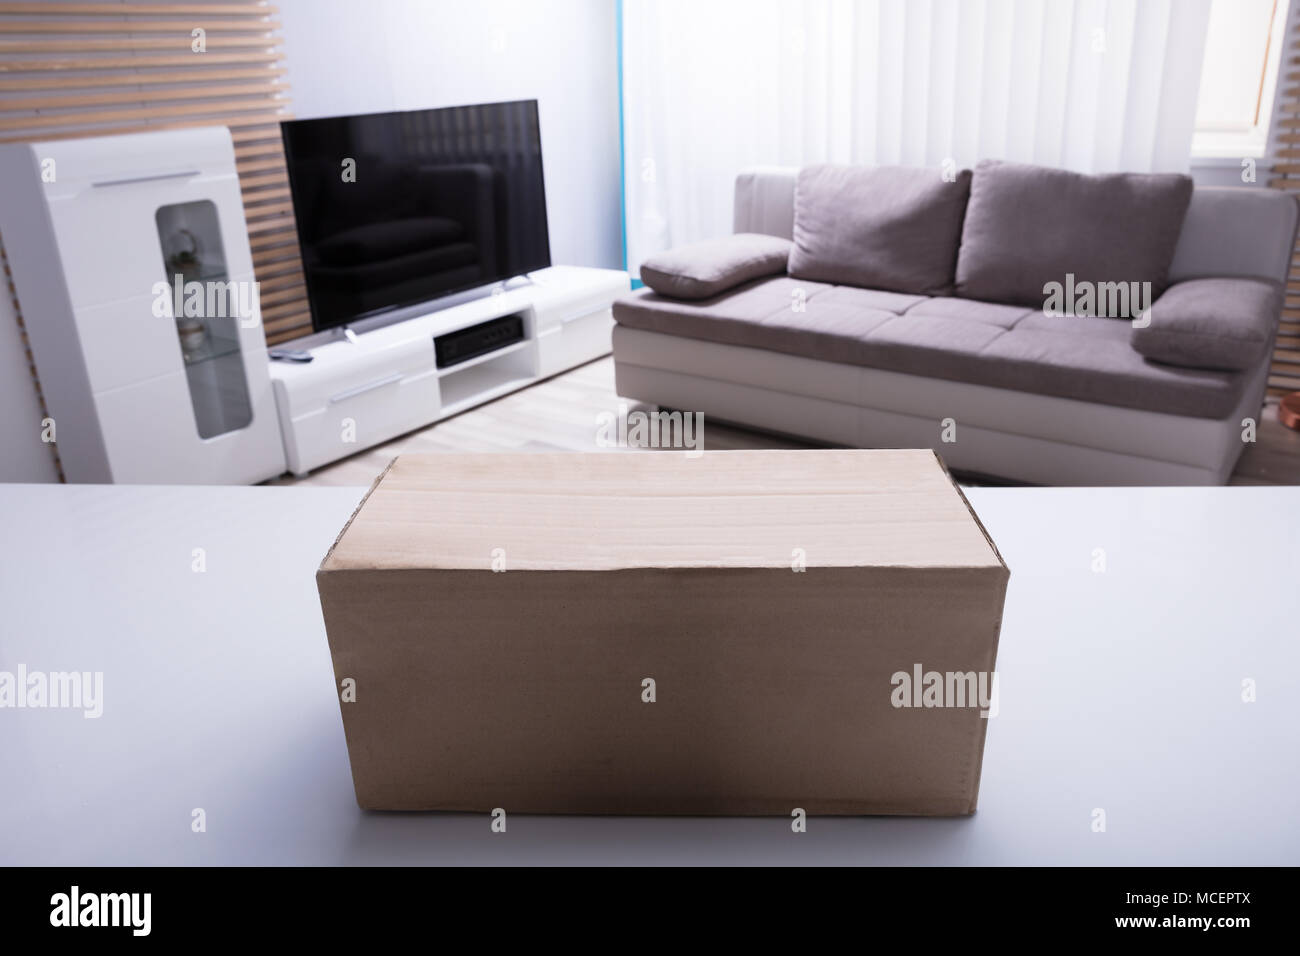 Close-up Of Cardboard Box On White Desk In Living Room Stock Photo